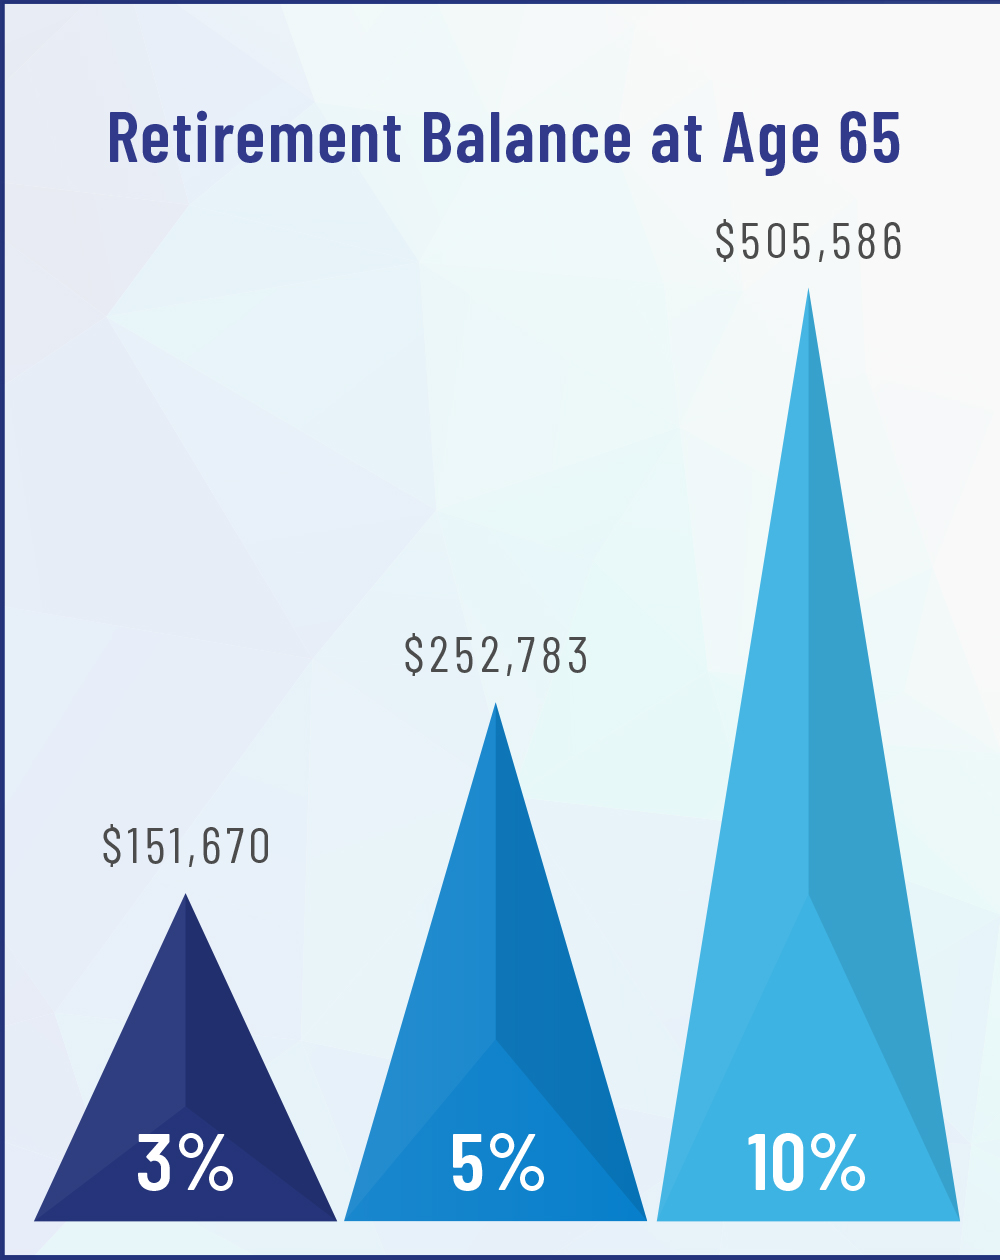 Chart: retirement balance at age 65. This chart shows the difference between investing 3%, 5%, and 10% of income over a lifetime. Investing 3% results in $151,670 at age 65 while investing 10% results in $505,586 at age 65.